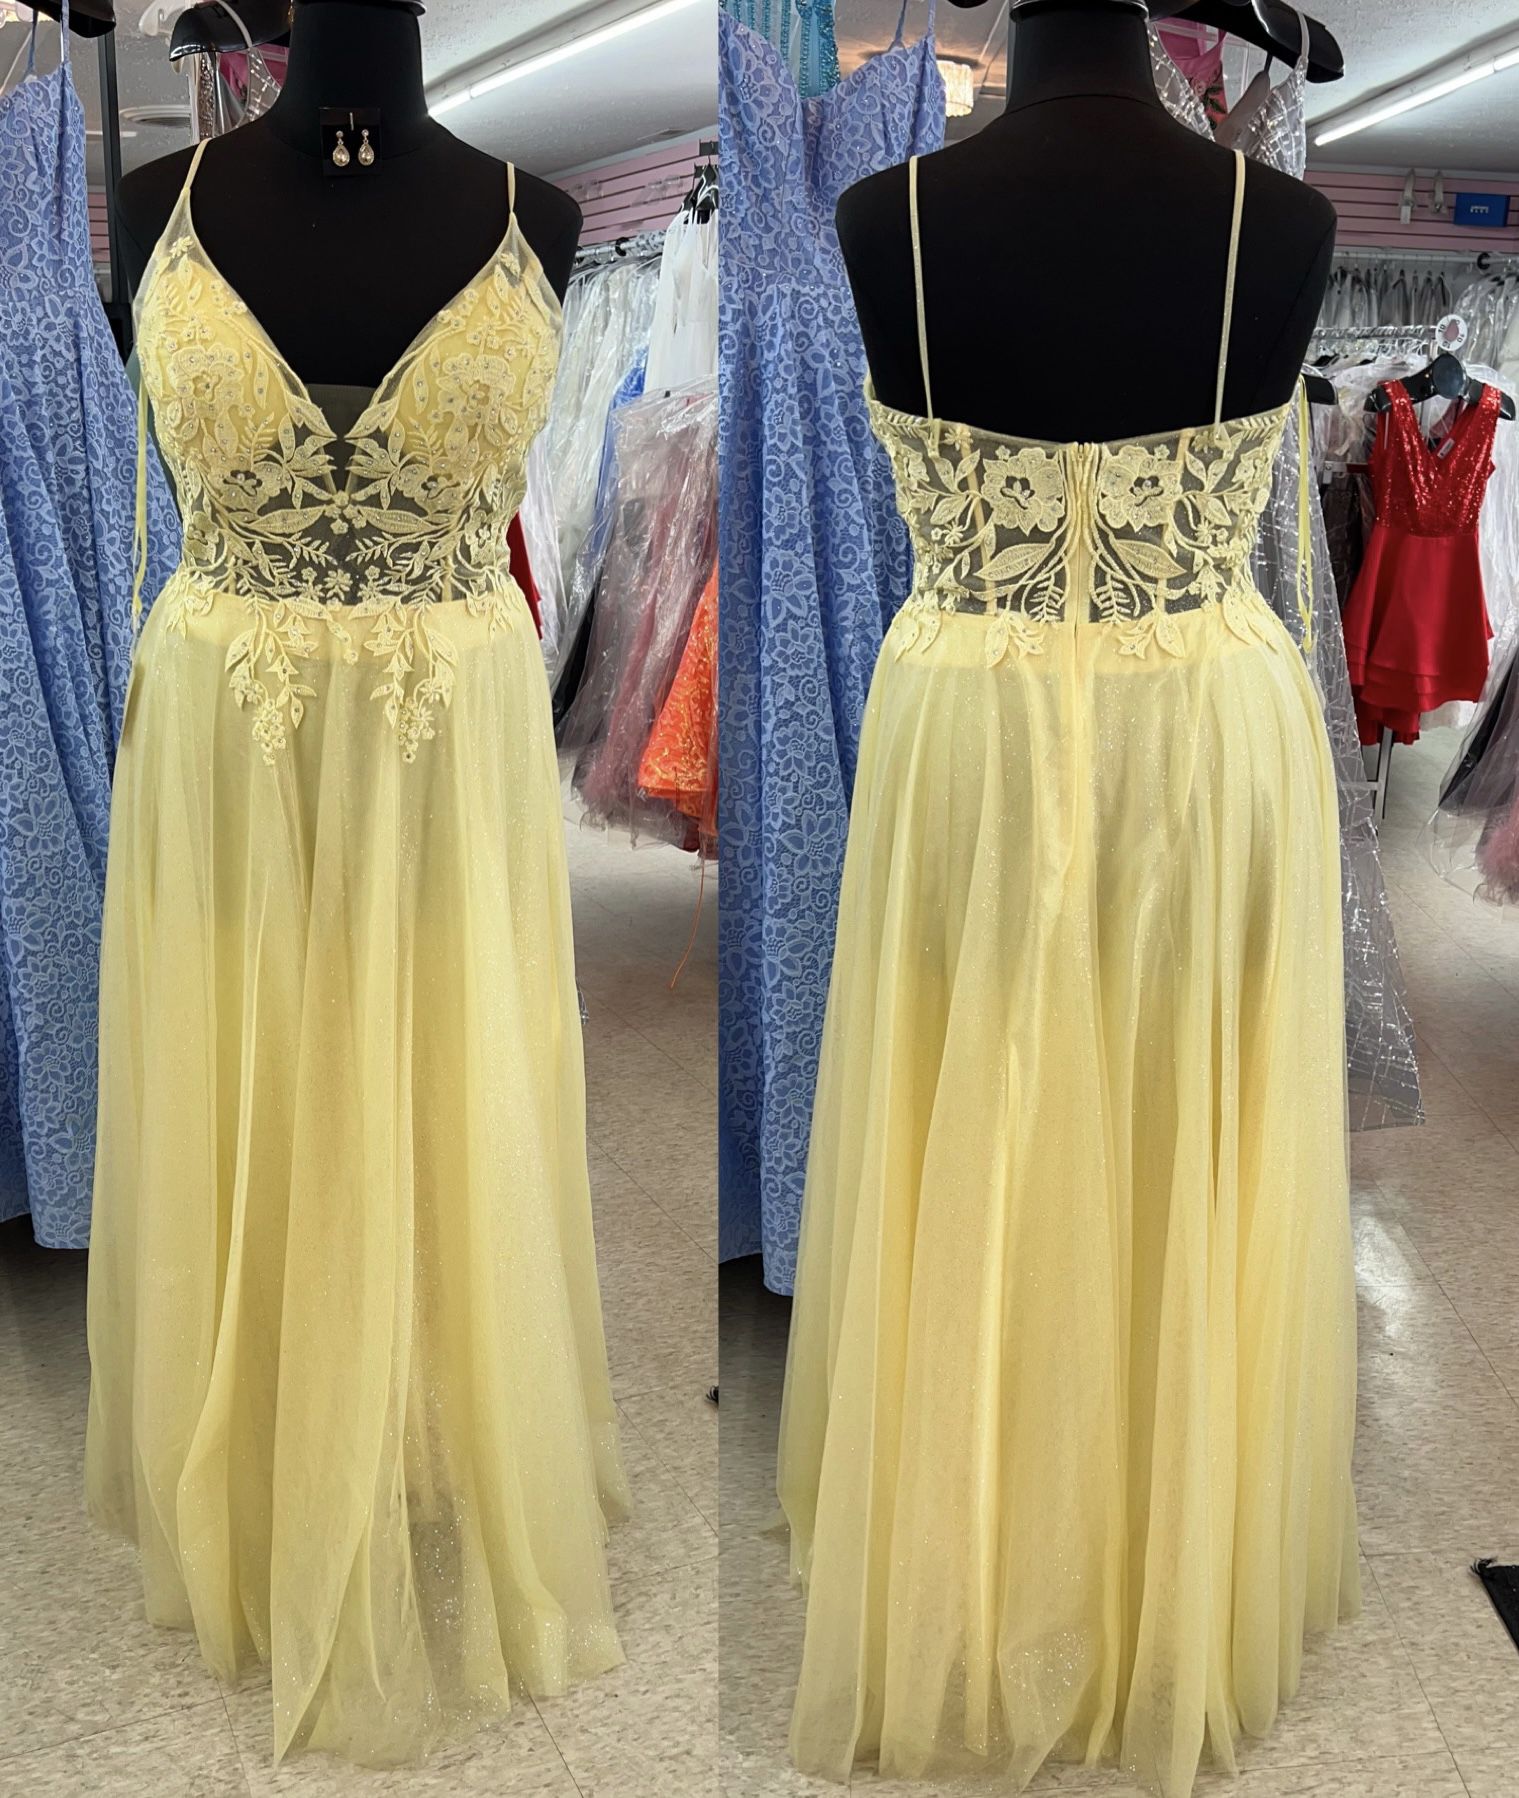 New With Tags Size 2X Yellow & Glitter Prom Dress & Formal Dress $99